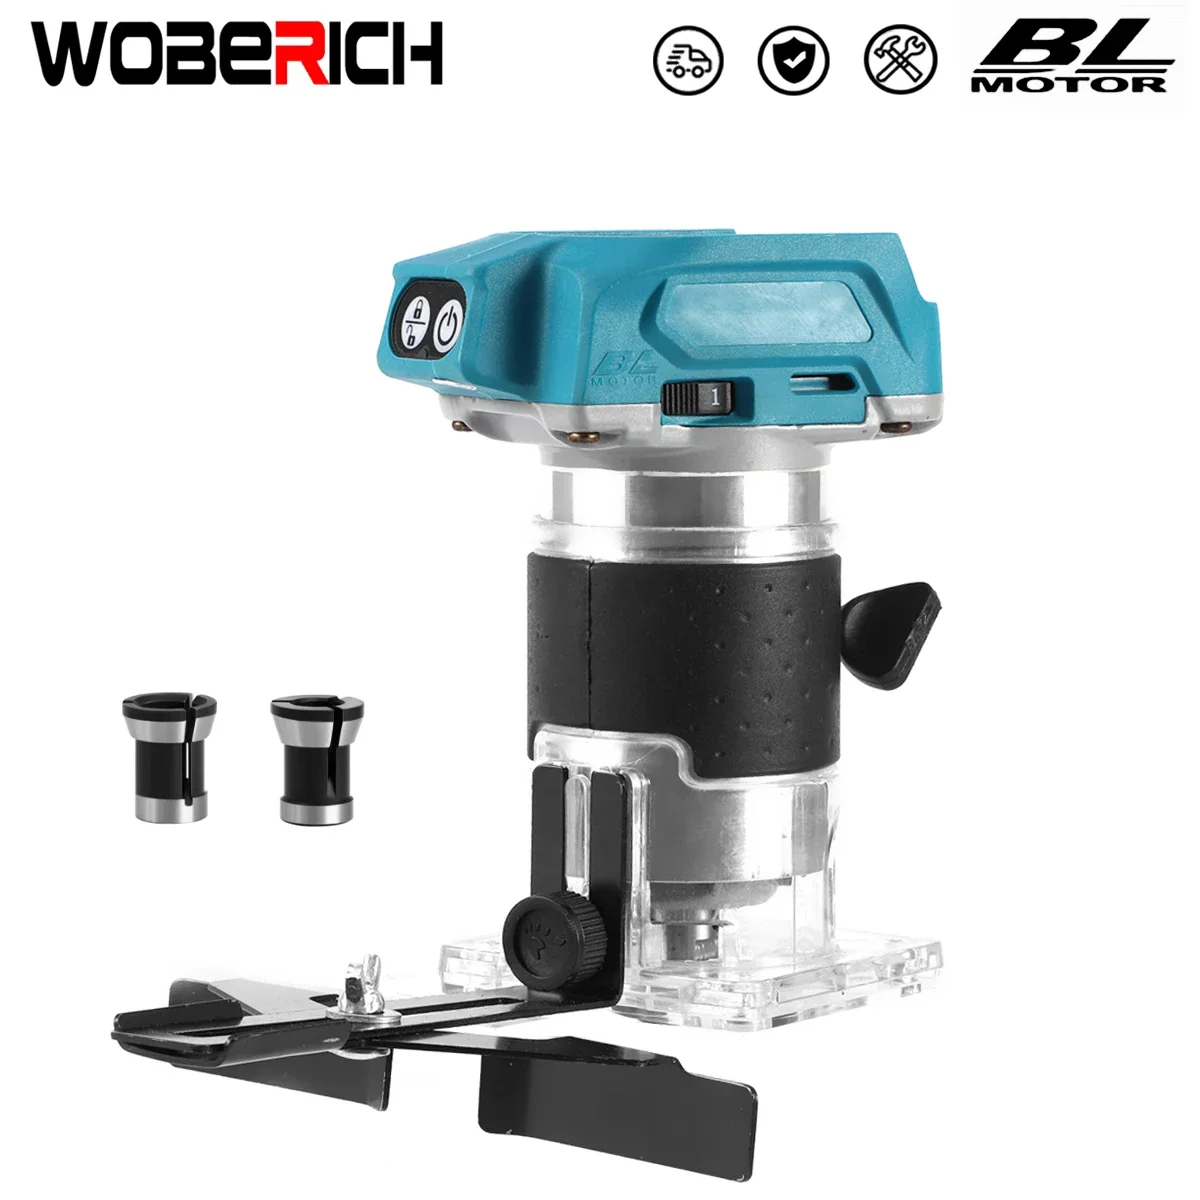 5 Speeds Brushless Electric Hand Trimmer Cordless Wood Router Woodworking Engraving Slotting Trimming Milling Machine For Makita